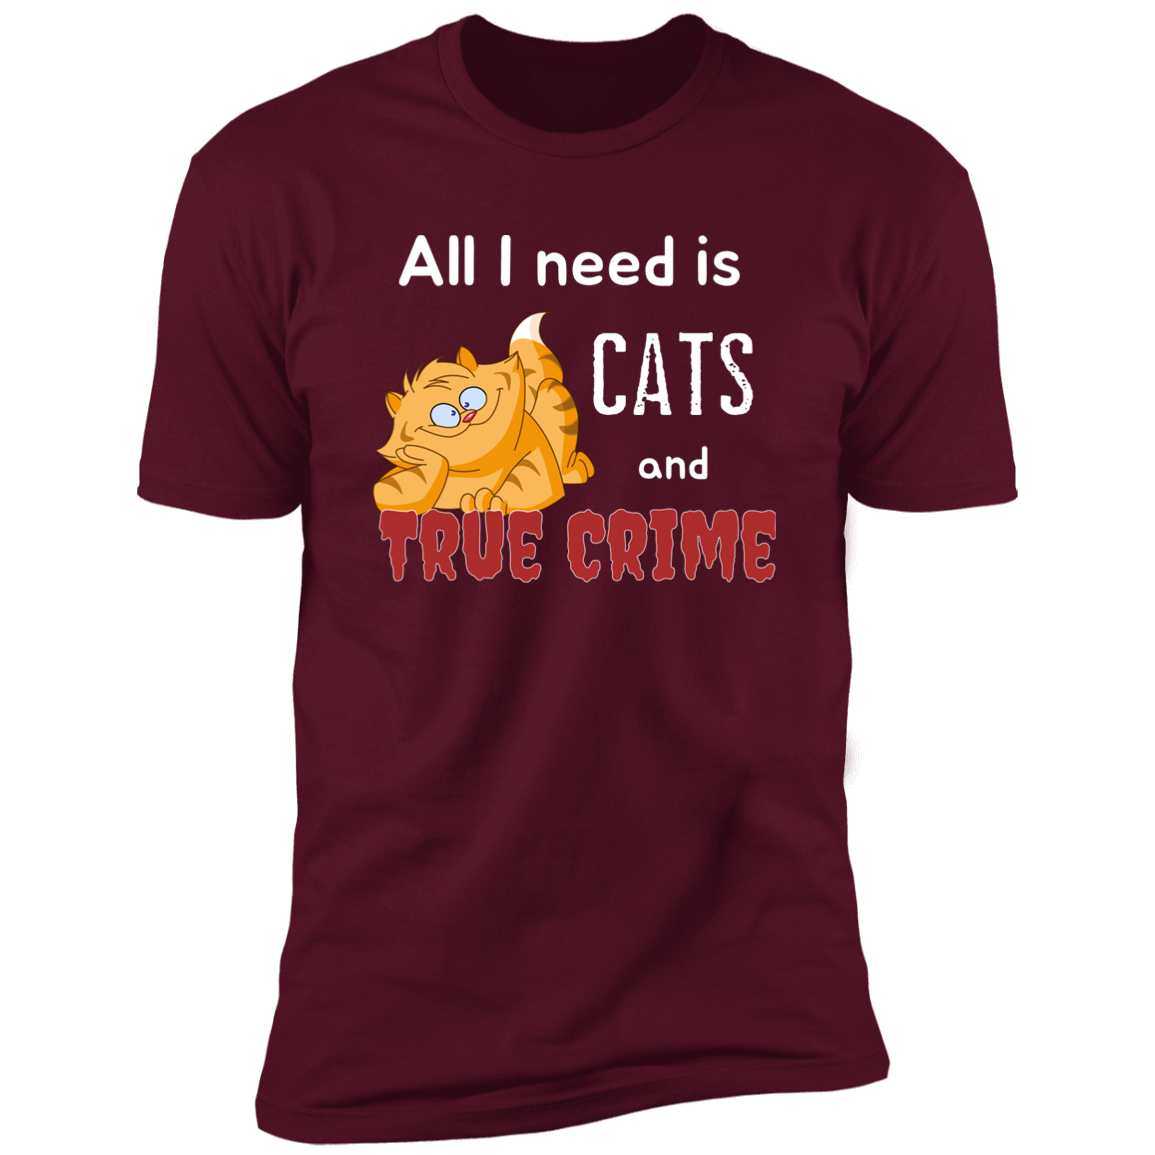 All I Need is Cats and True Crime, Cat shirt for humas, in maroon